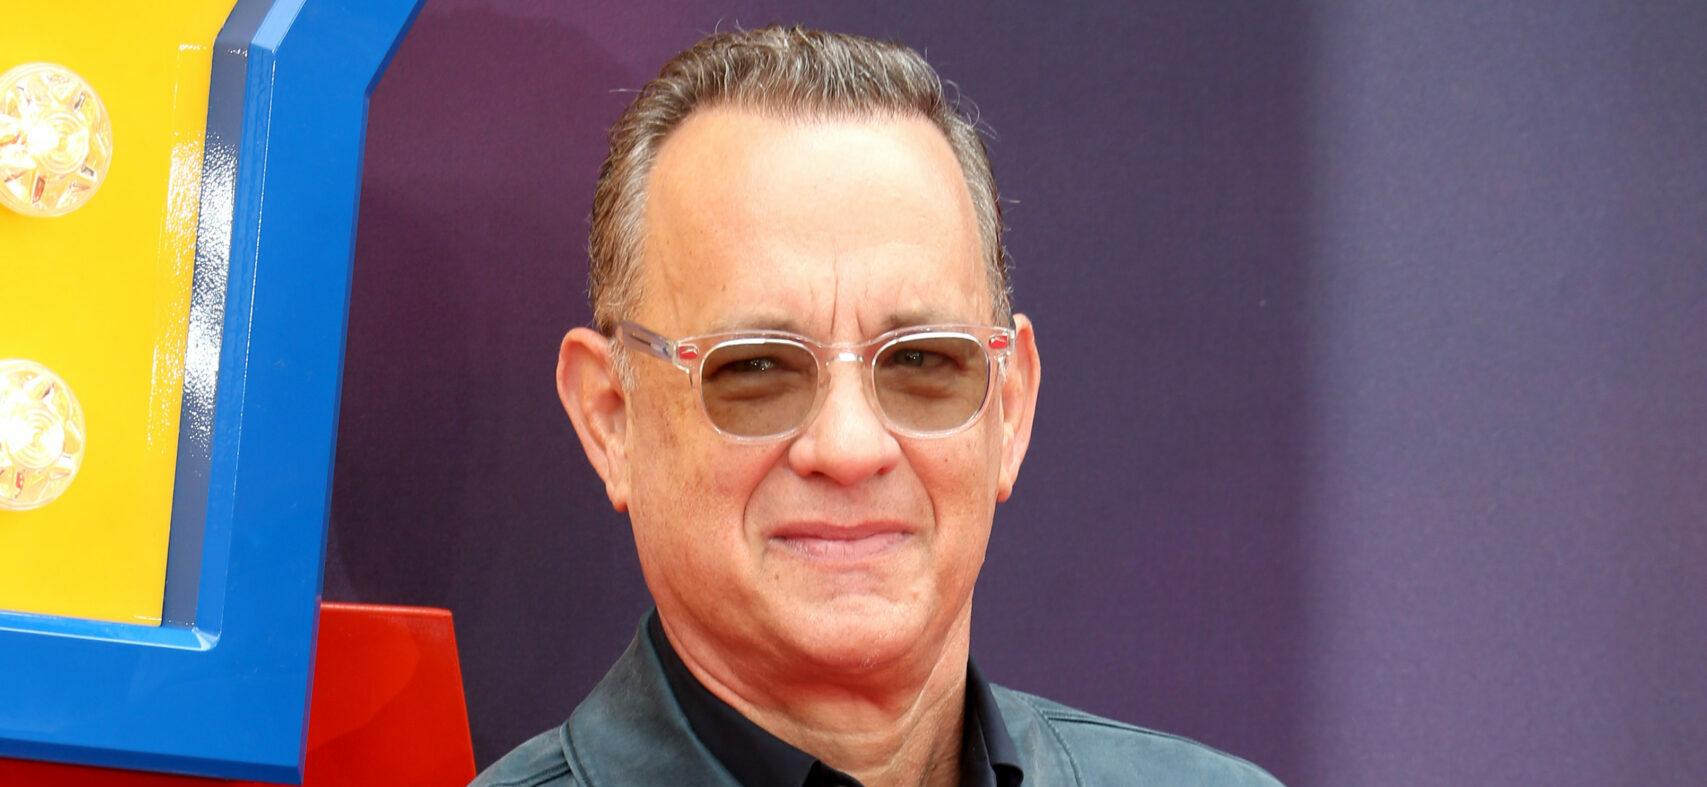 Tom Hanks Reacts To Negative Criticism Of His Debut Novel As Critics Slam His ‘Clunky’ Writing